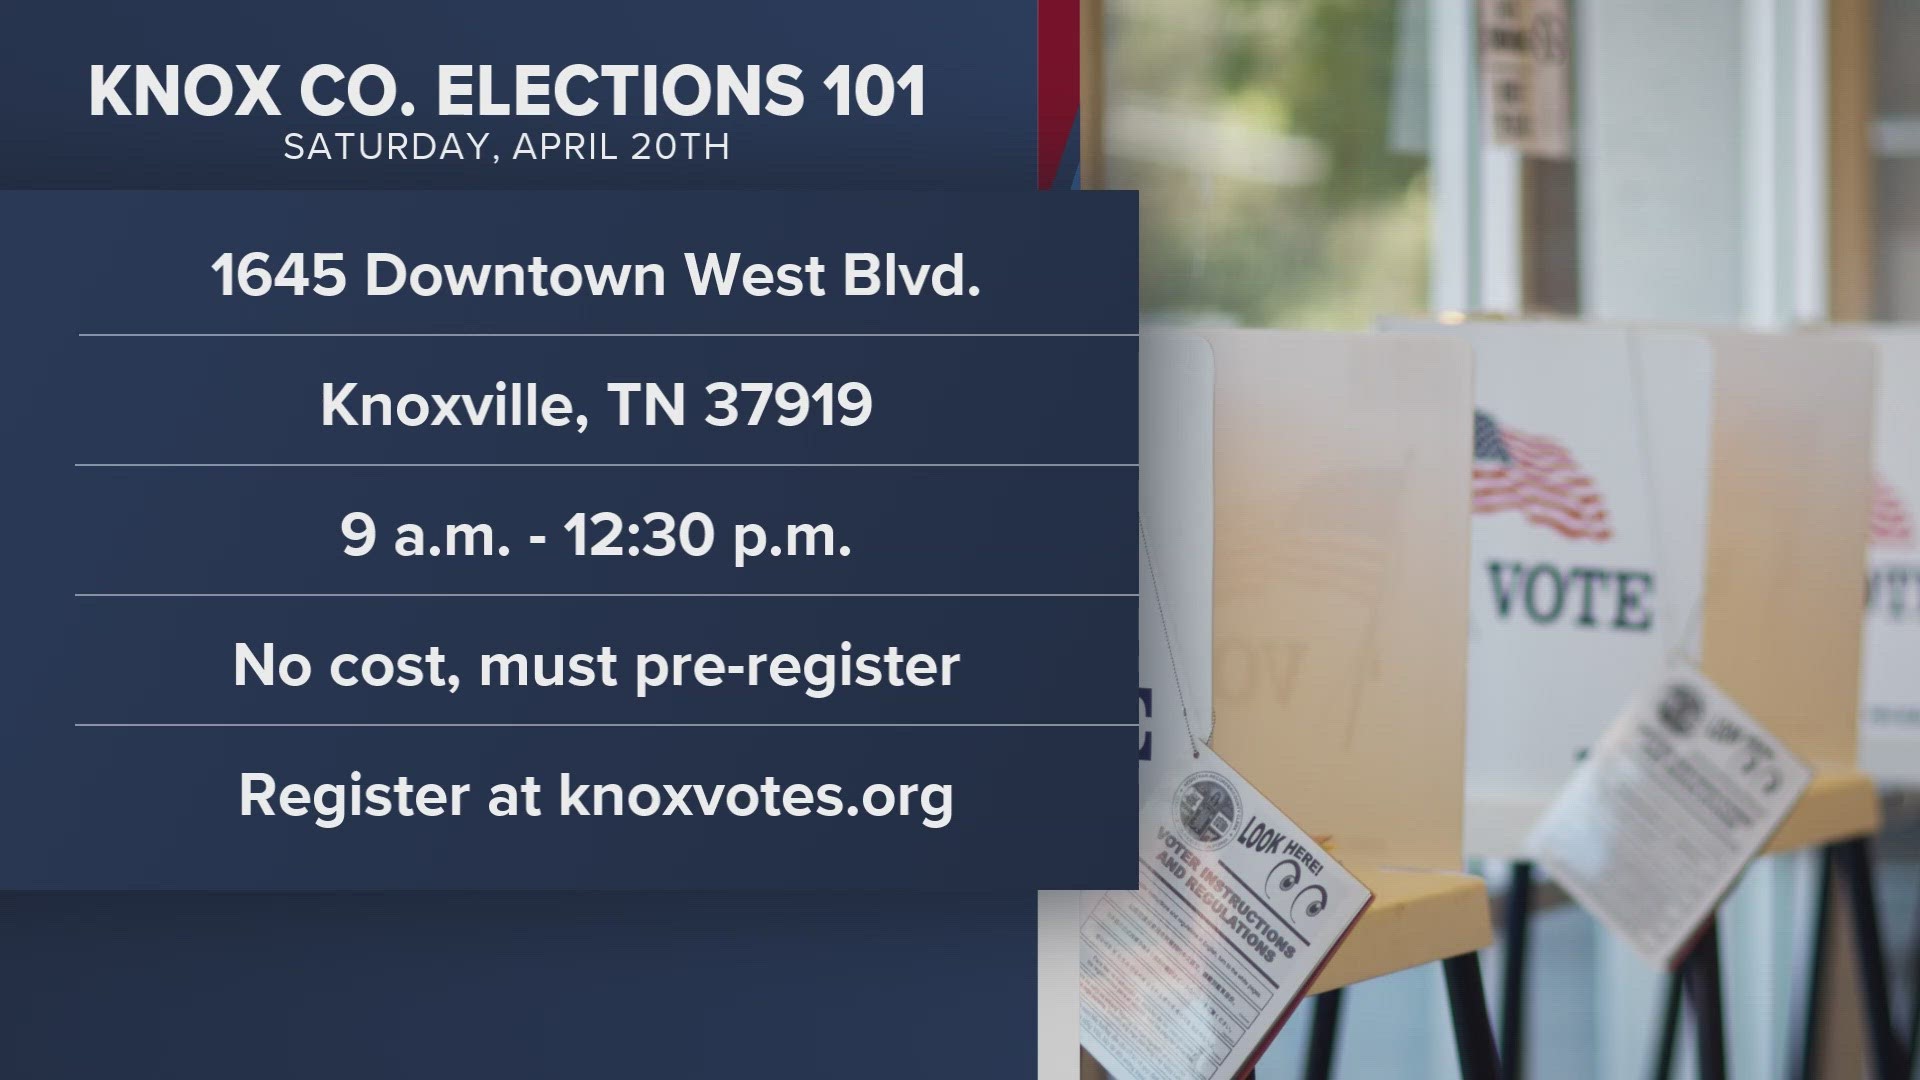 Before you cast your ballot in this year's election, there's an opportunity for you to learn more about the voting process in Knox County.